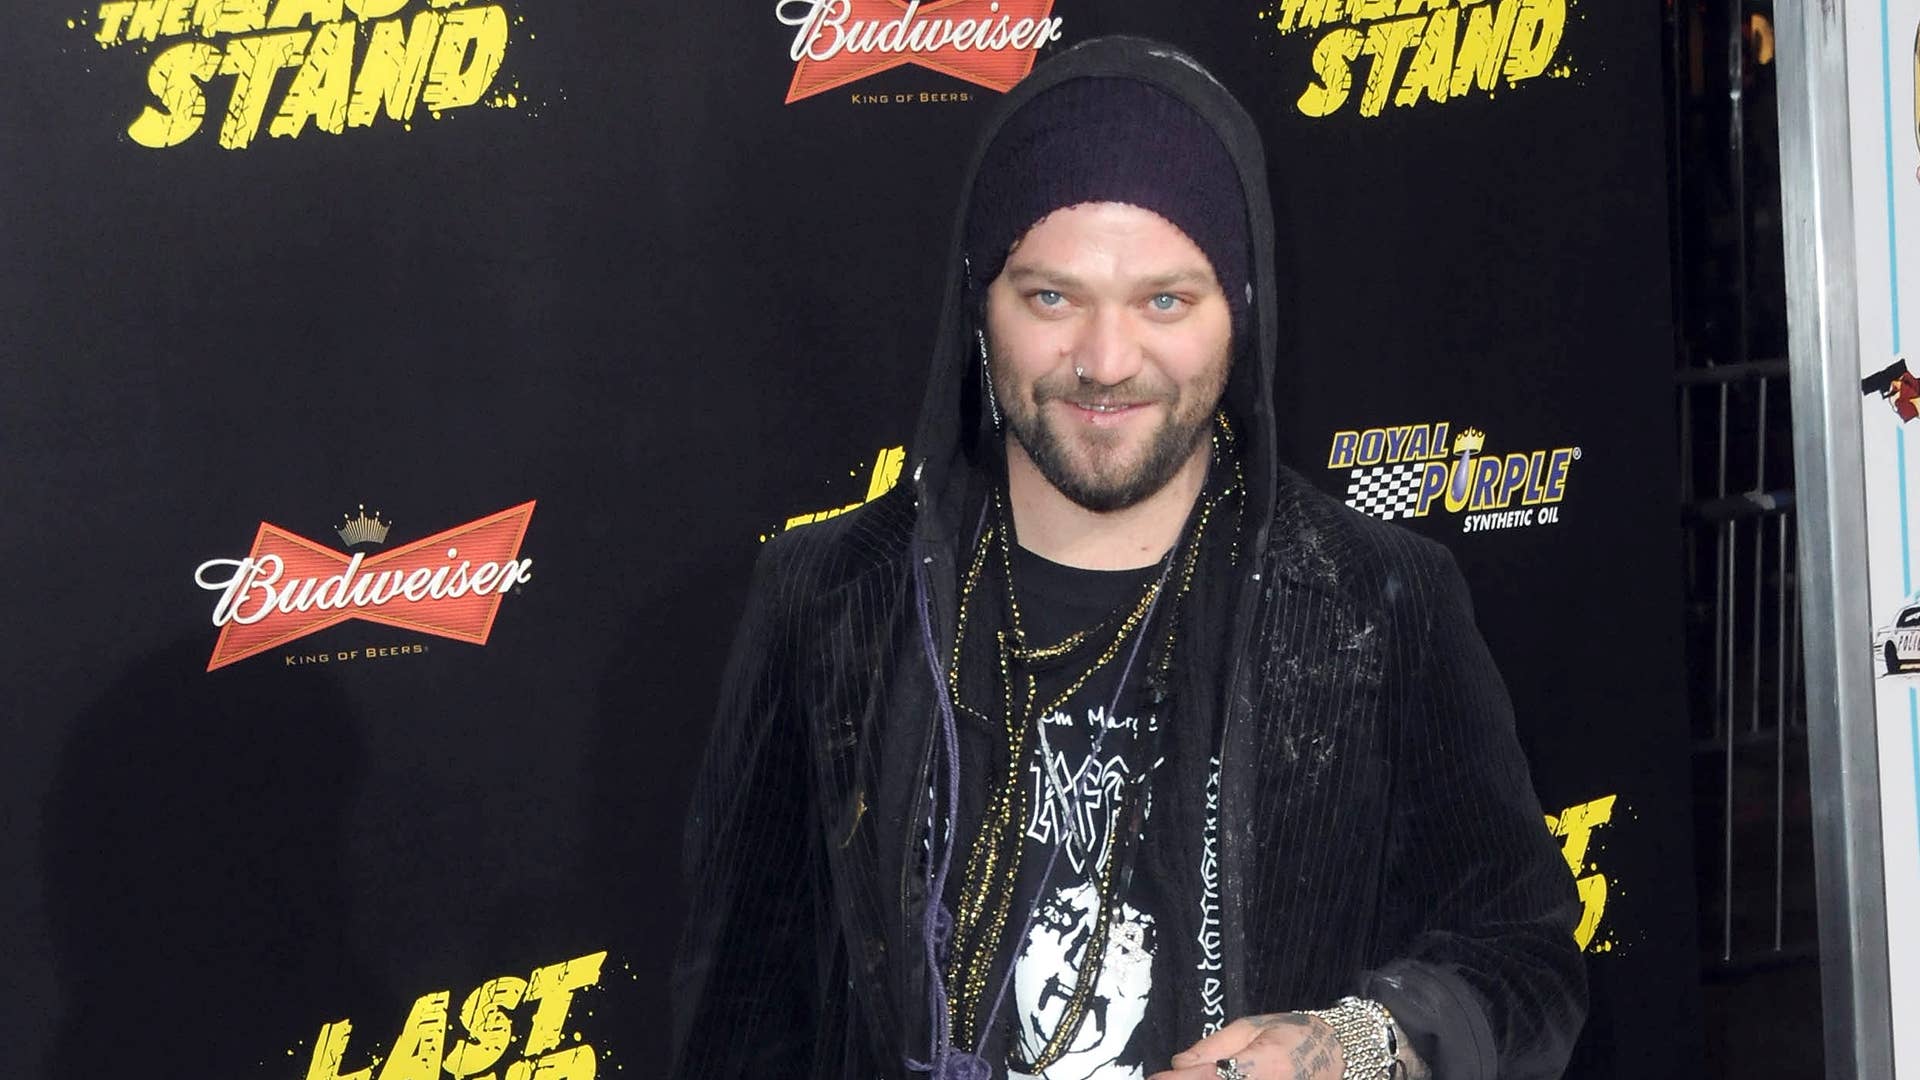 TV personality Bam Margera arrives for The Los Angeles Premiere of "The Last Stand"